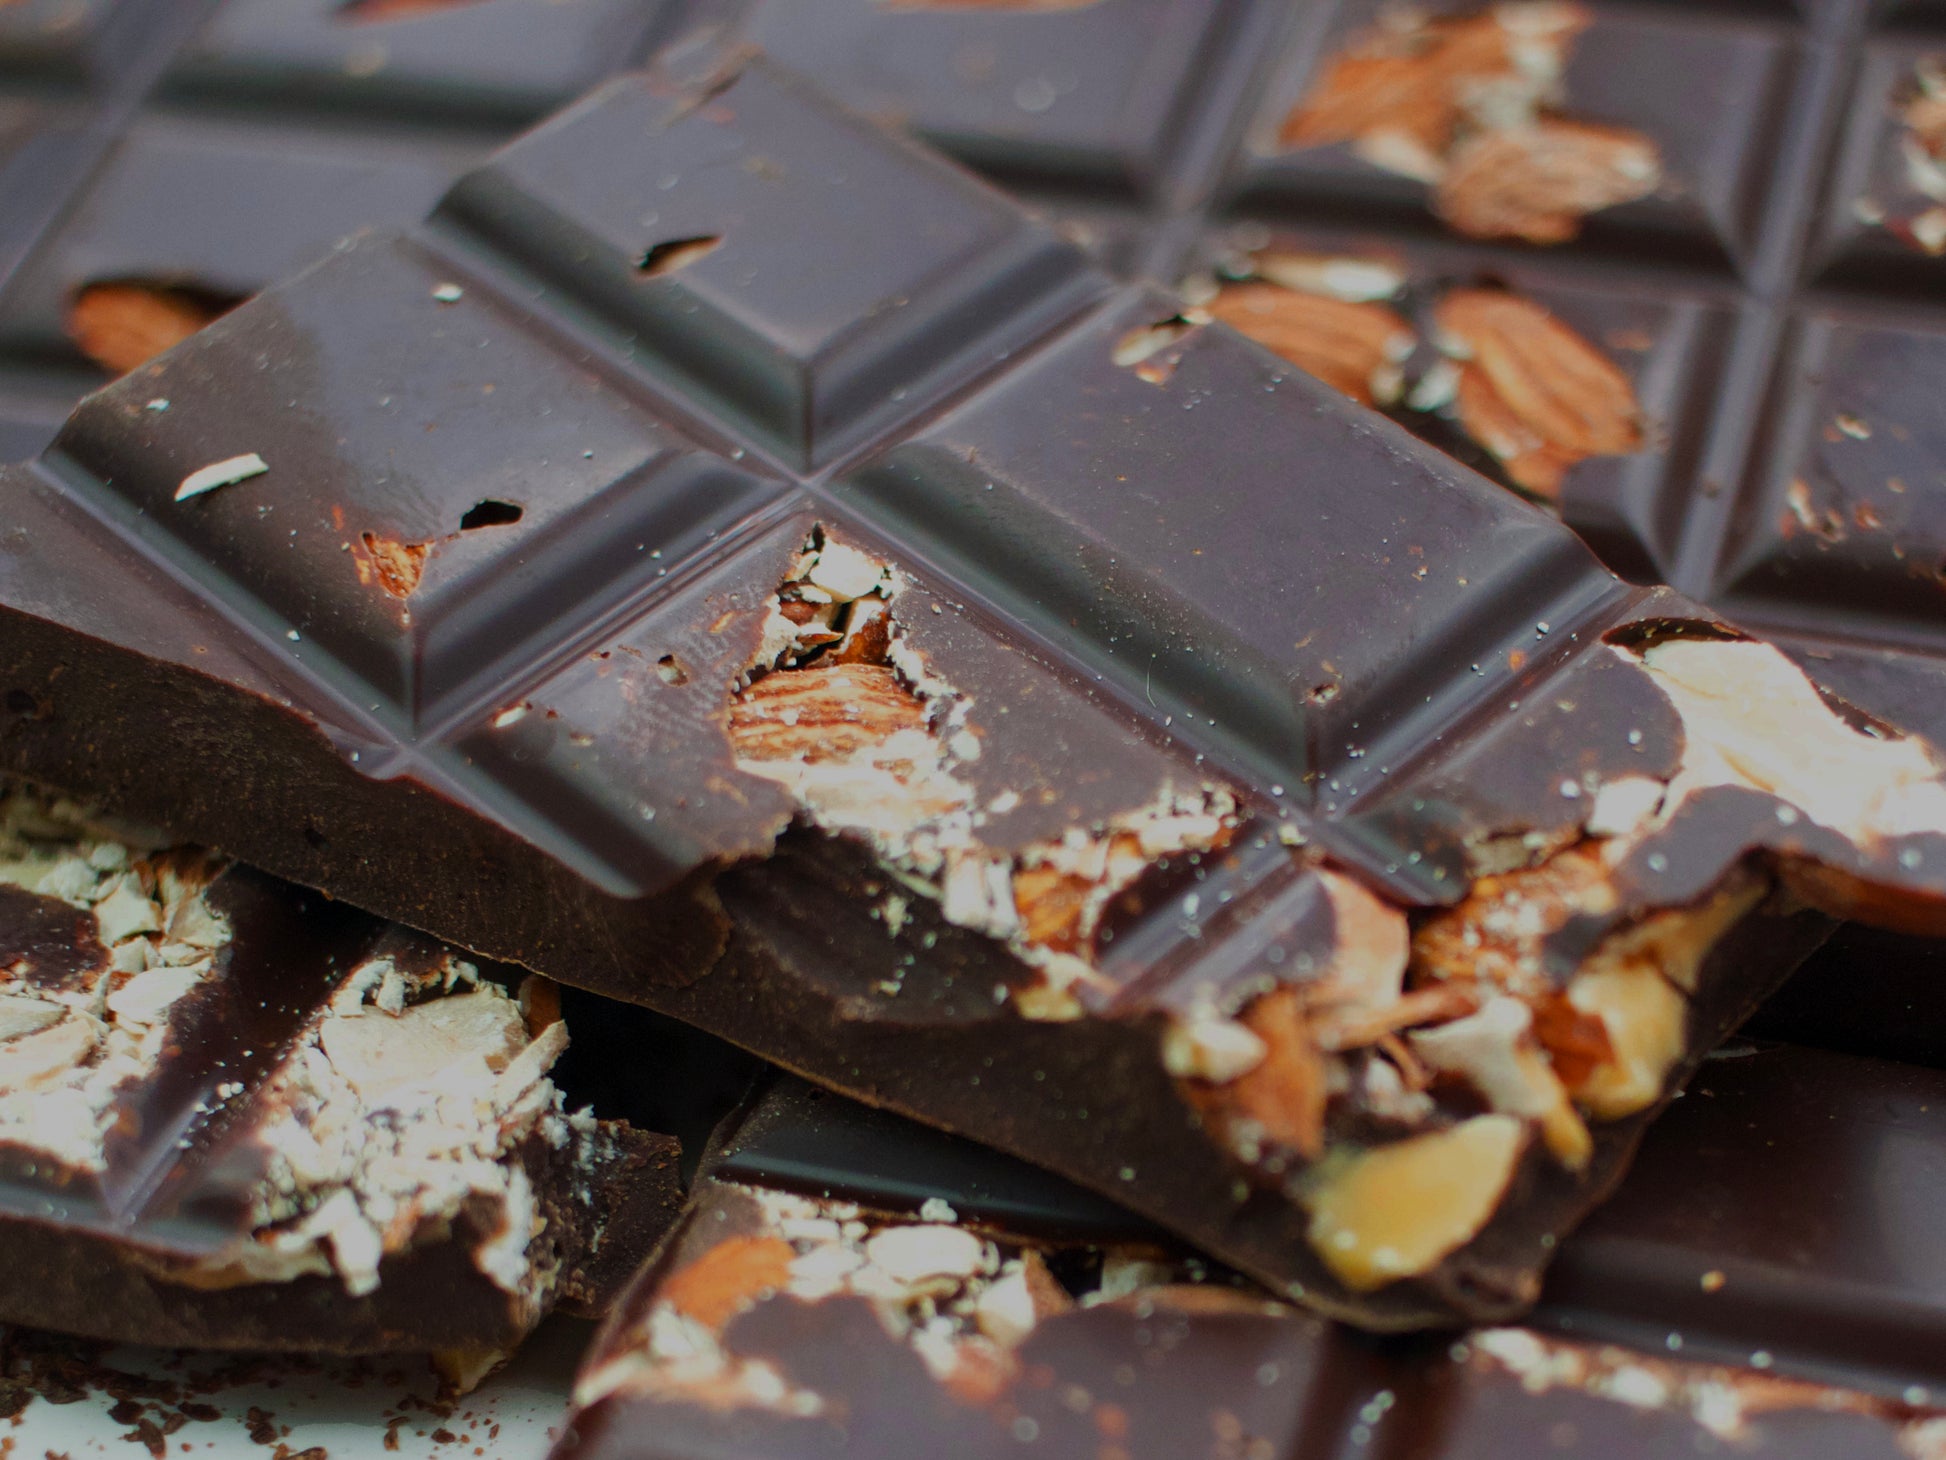 image shows close up of sugar free dark almond bar with embedded almonds.